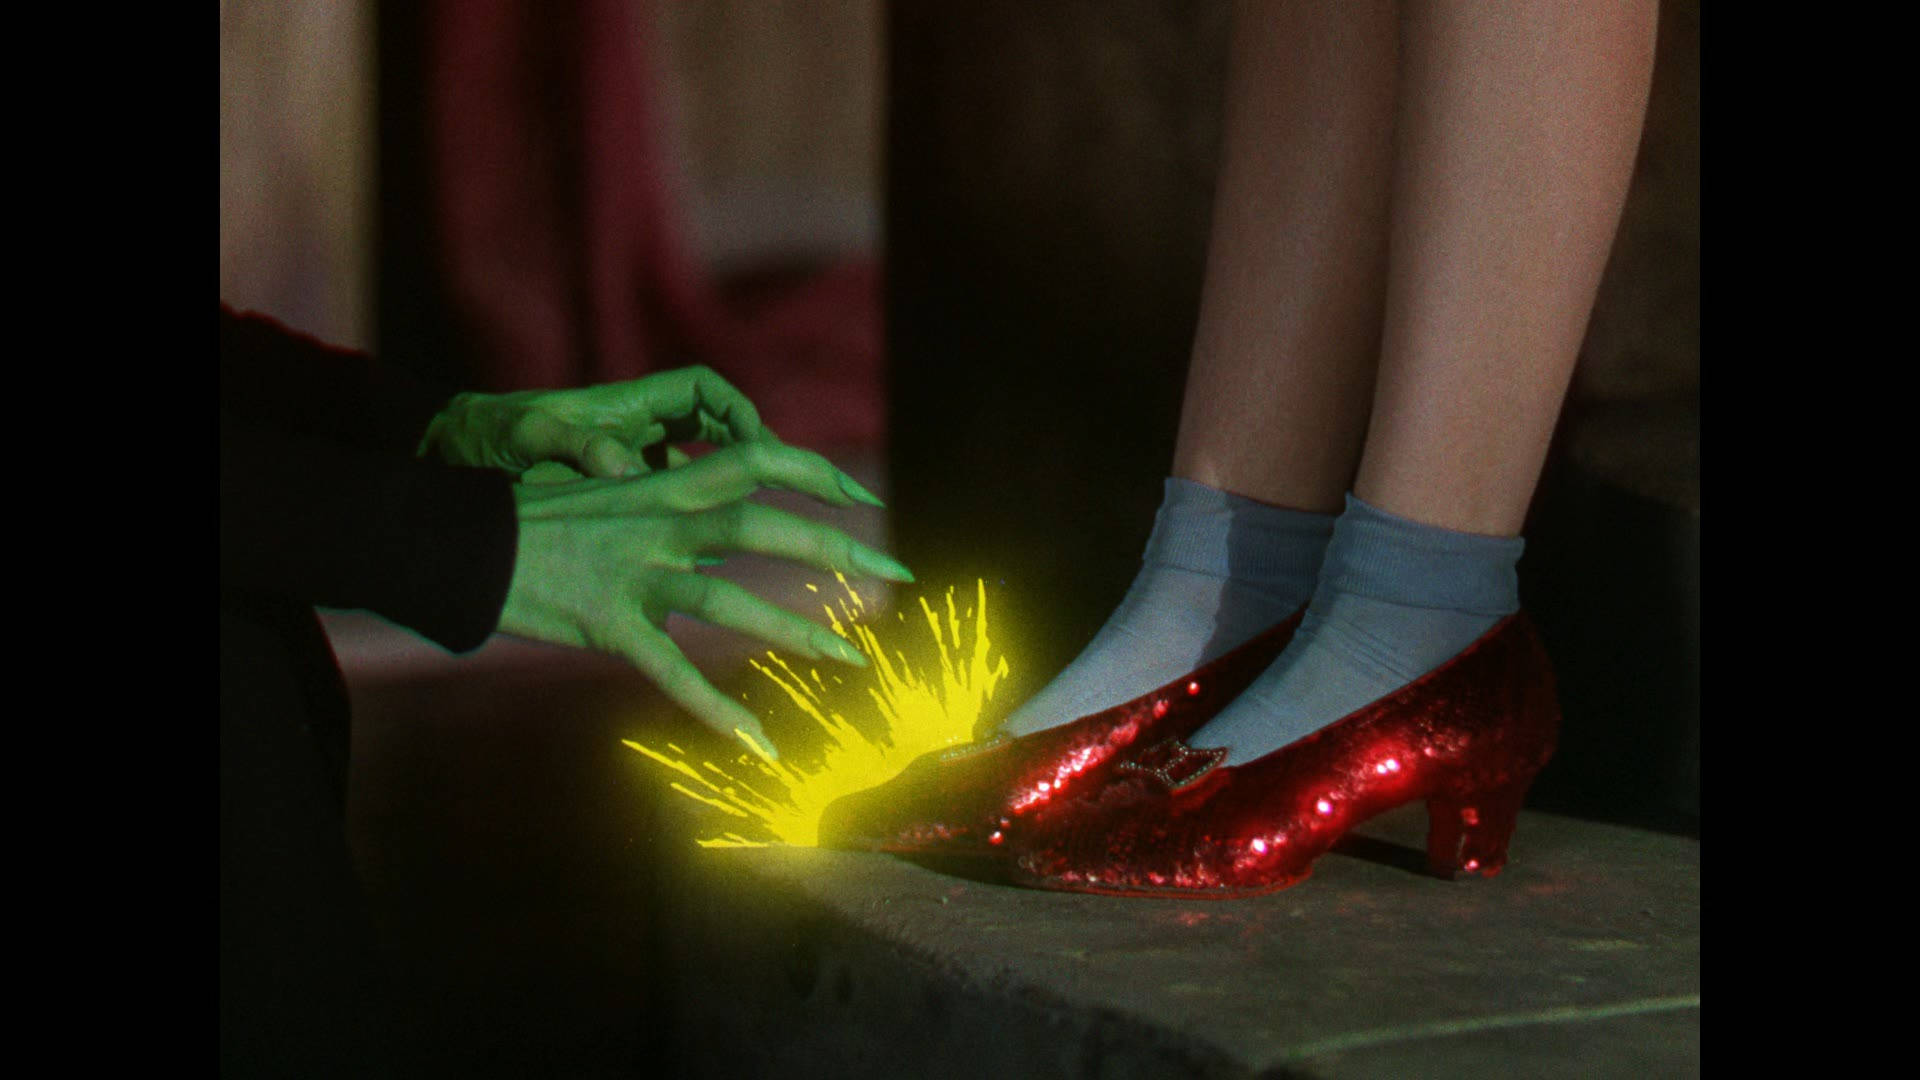 Staring Down The Spellbound Slippers - The Wizard Of Oz